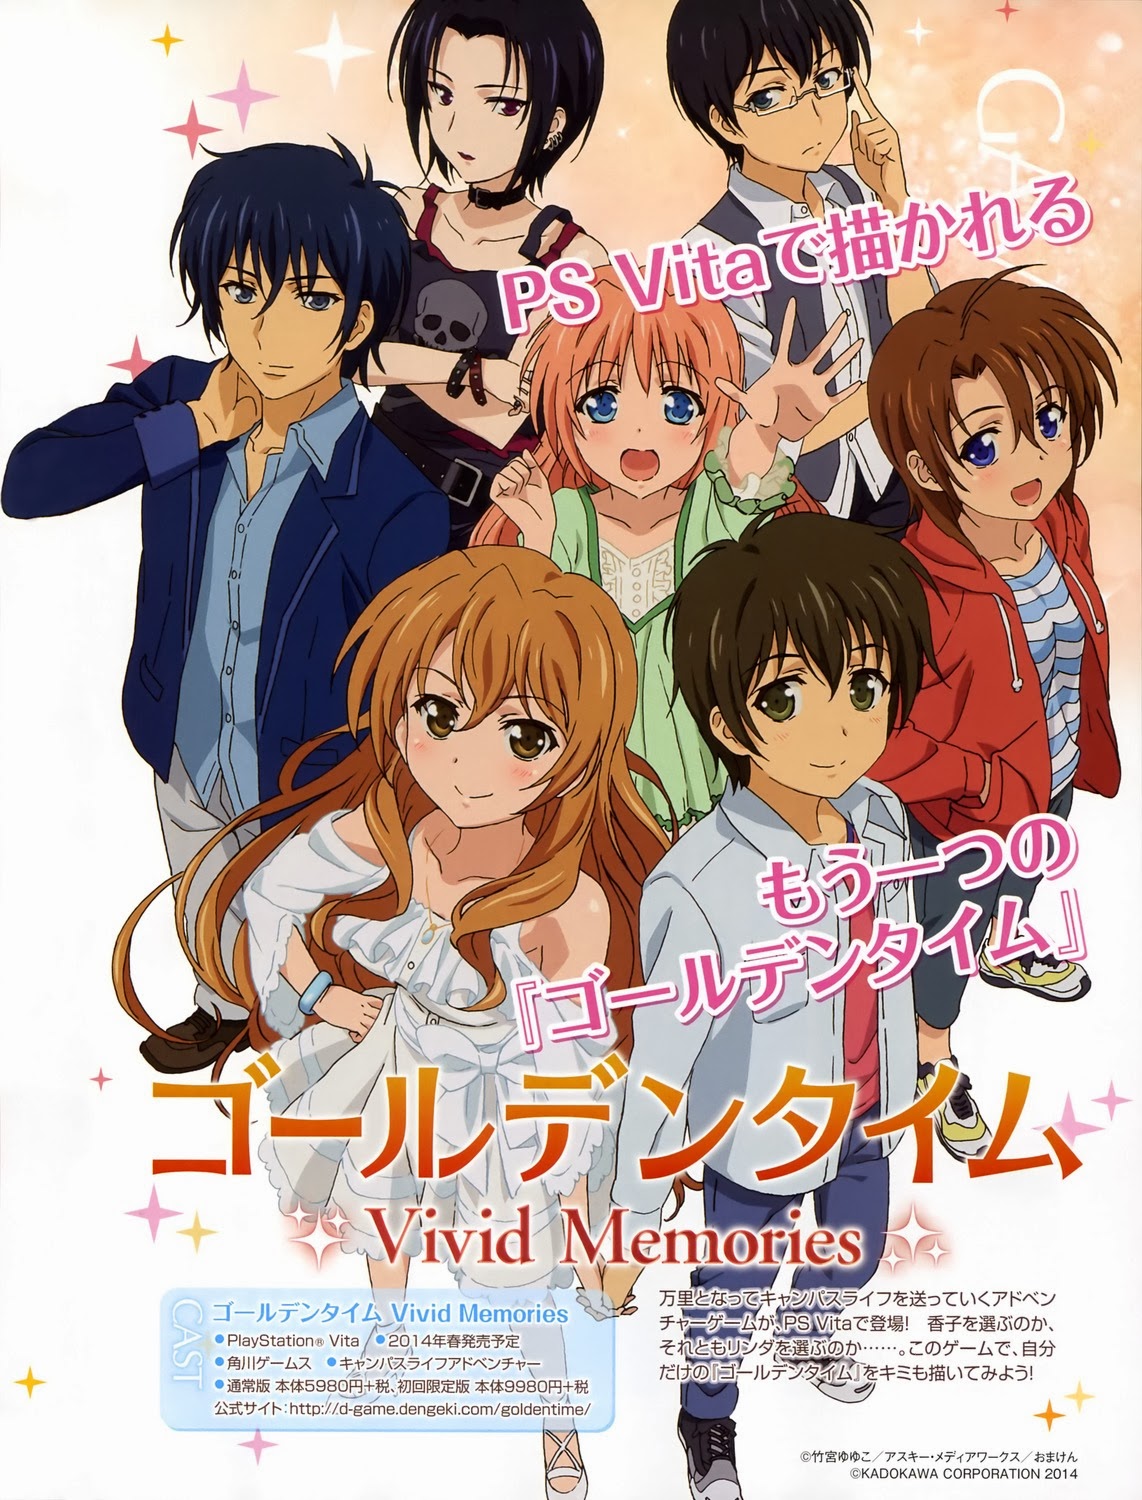 Golden Time: Collection 2 Review (Anime) - Rice Digital